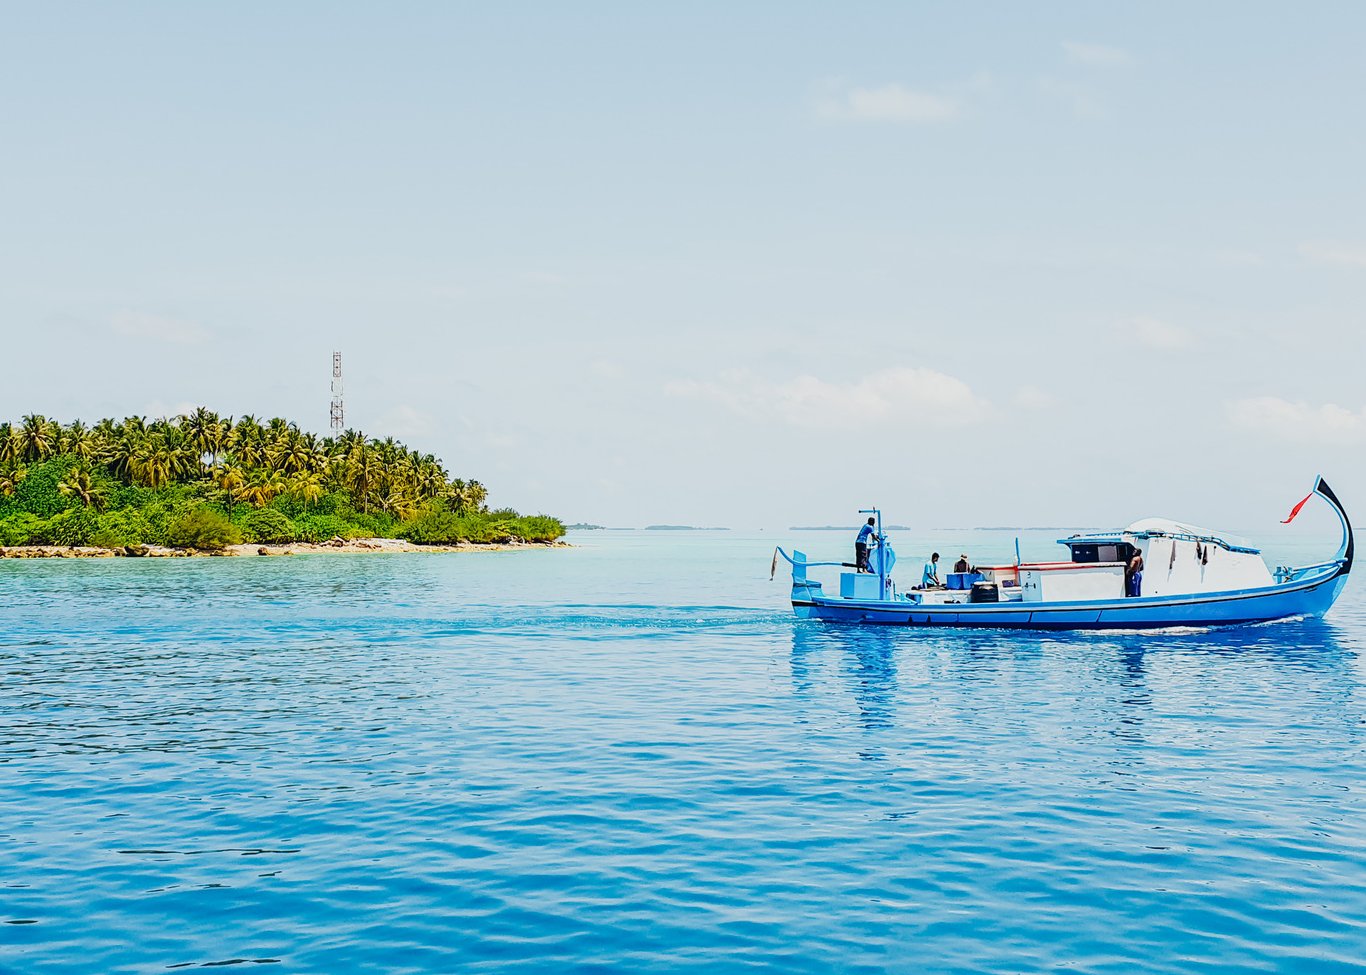 A scenic photo a fishing boat on the blue water in the Maldives 